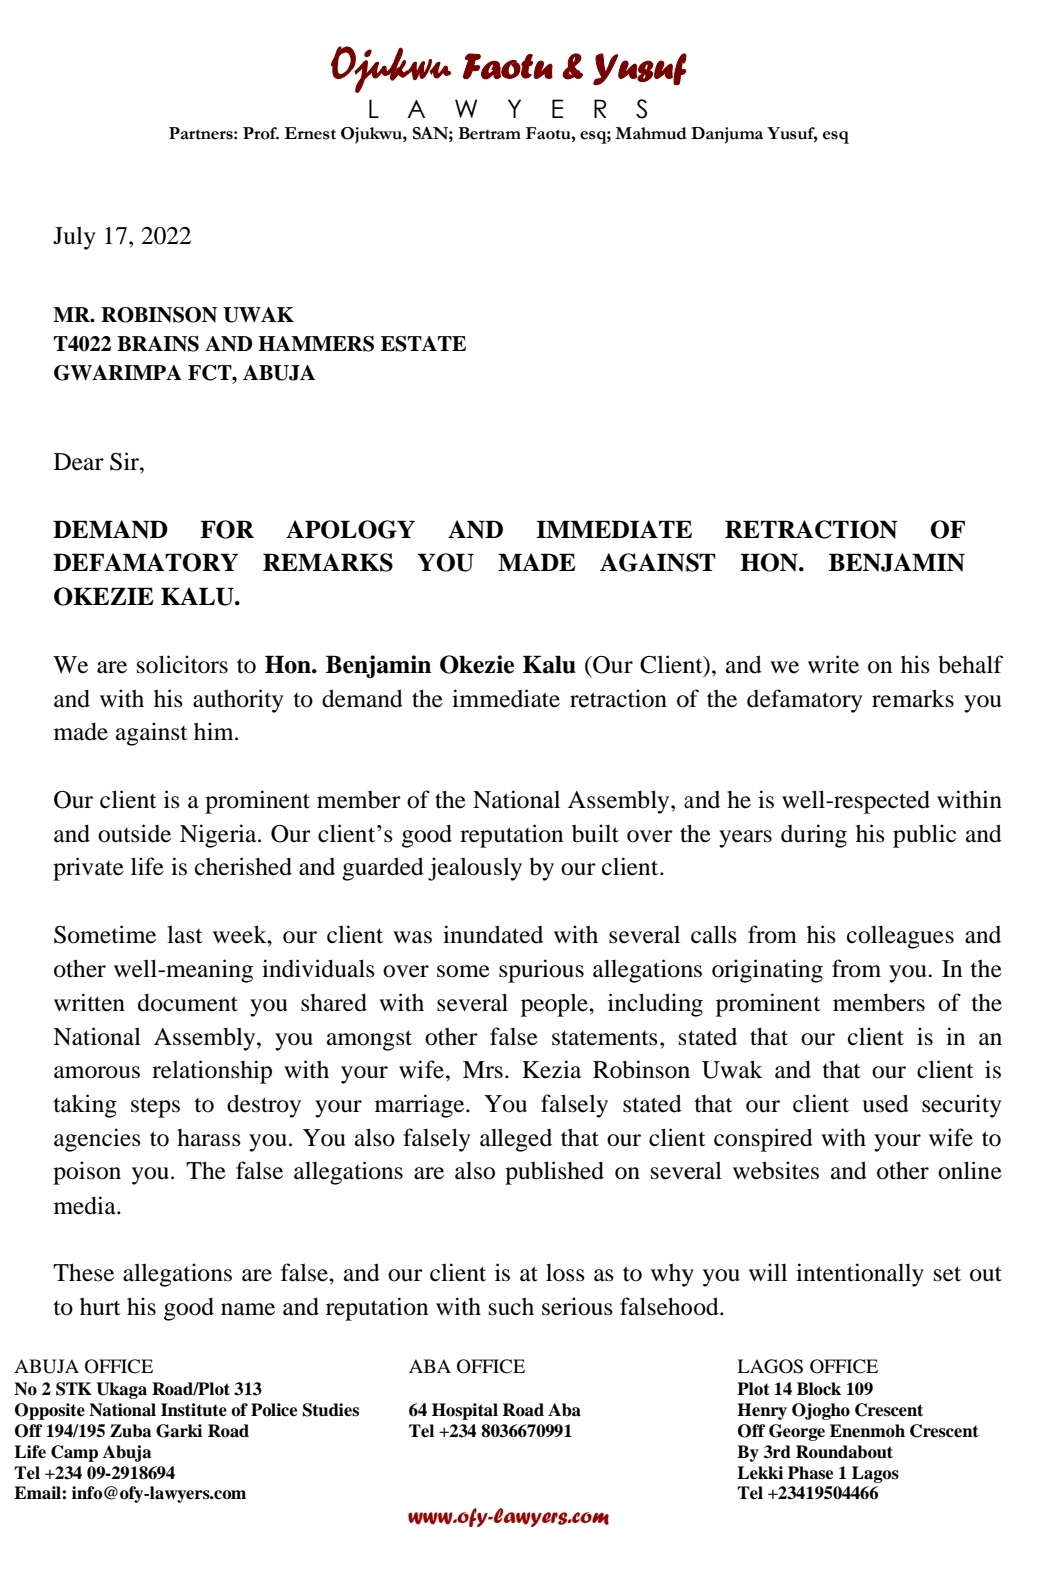 Apologise In 7 Days Or Face Legal Action Over Defamation, Rep. Ben Kalu Tells Uwak [Documents Attached]